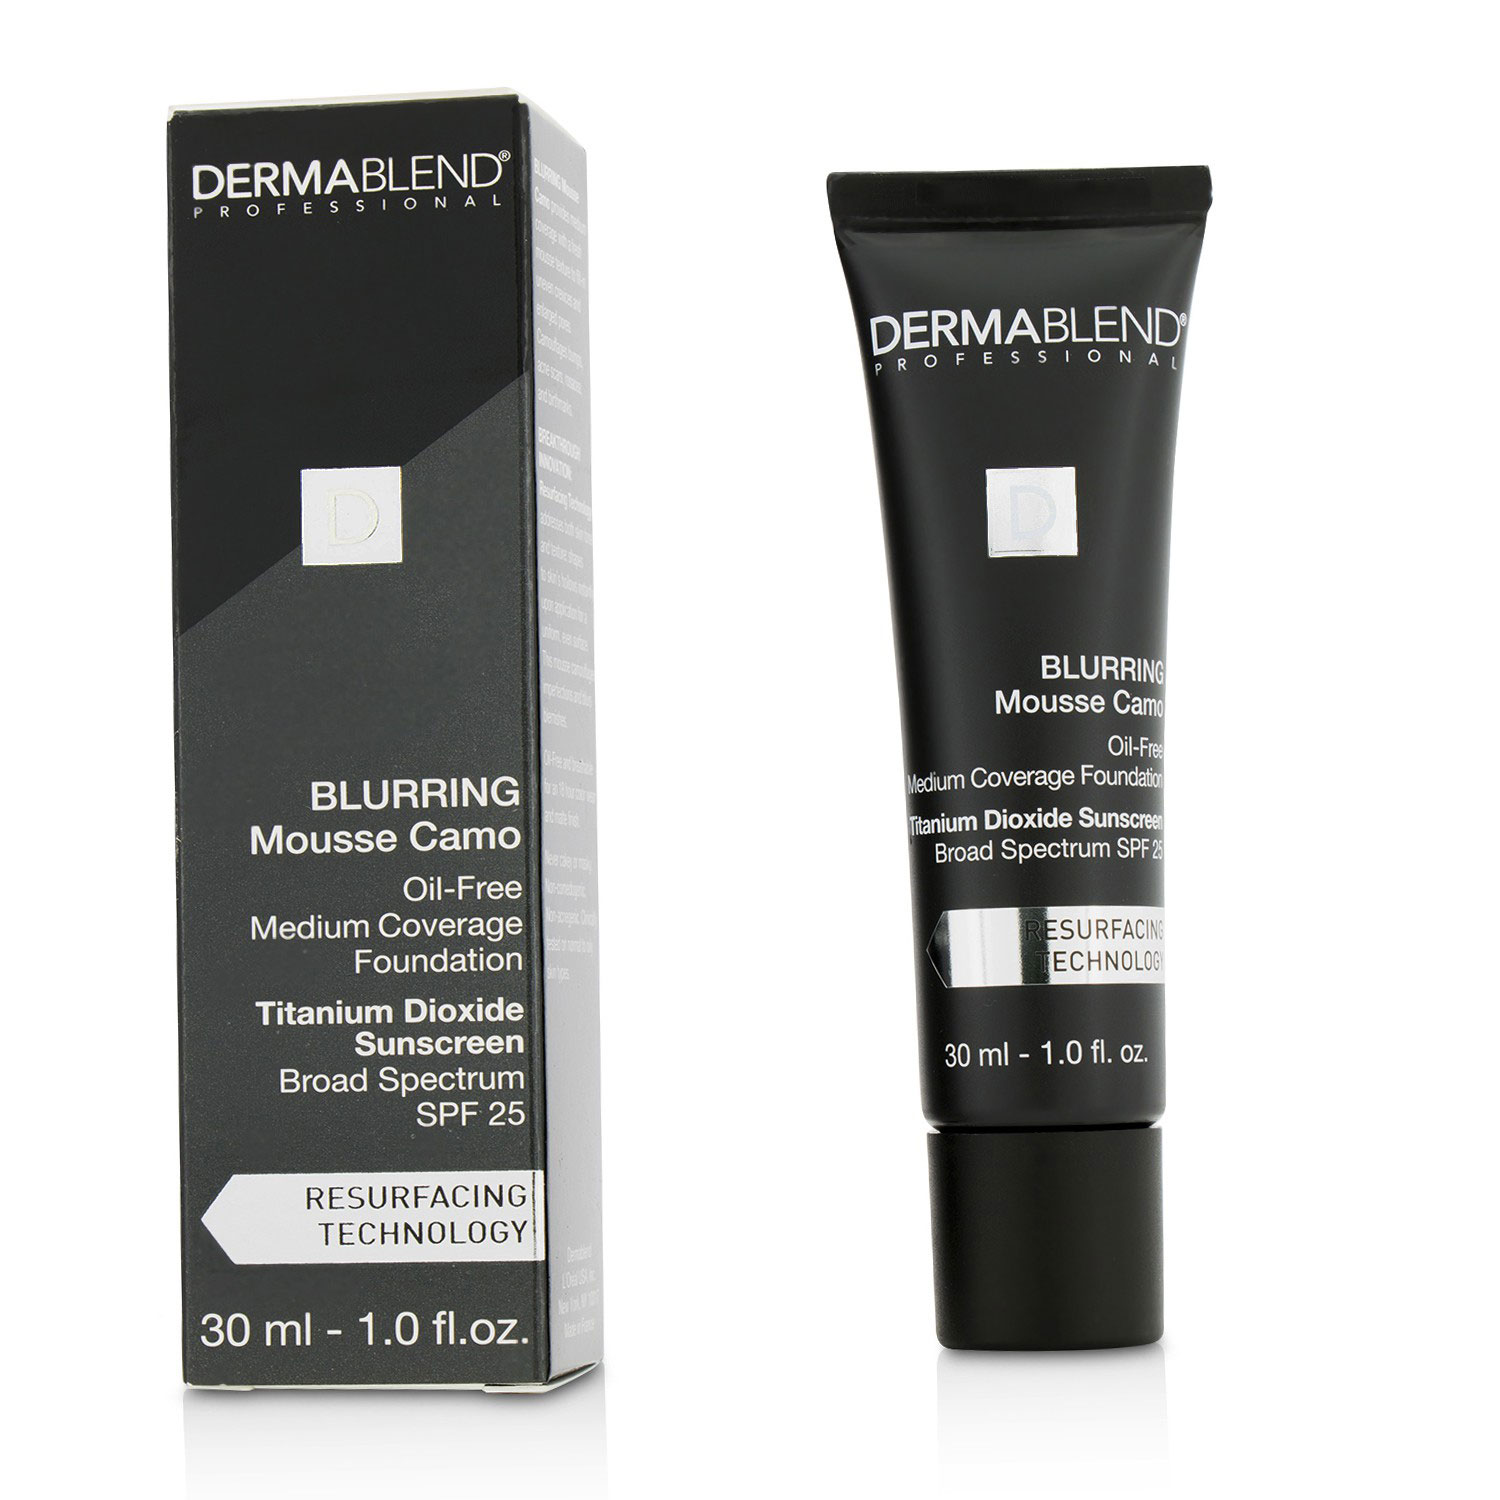 Blurring Mousee Camo Oil Free Foundation SPF 25 (Medium Coverage) - #65W Amber Dermablend Image